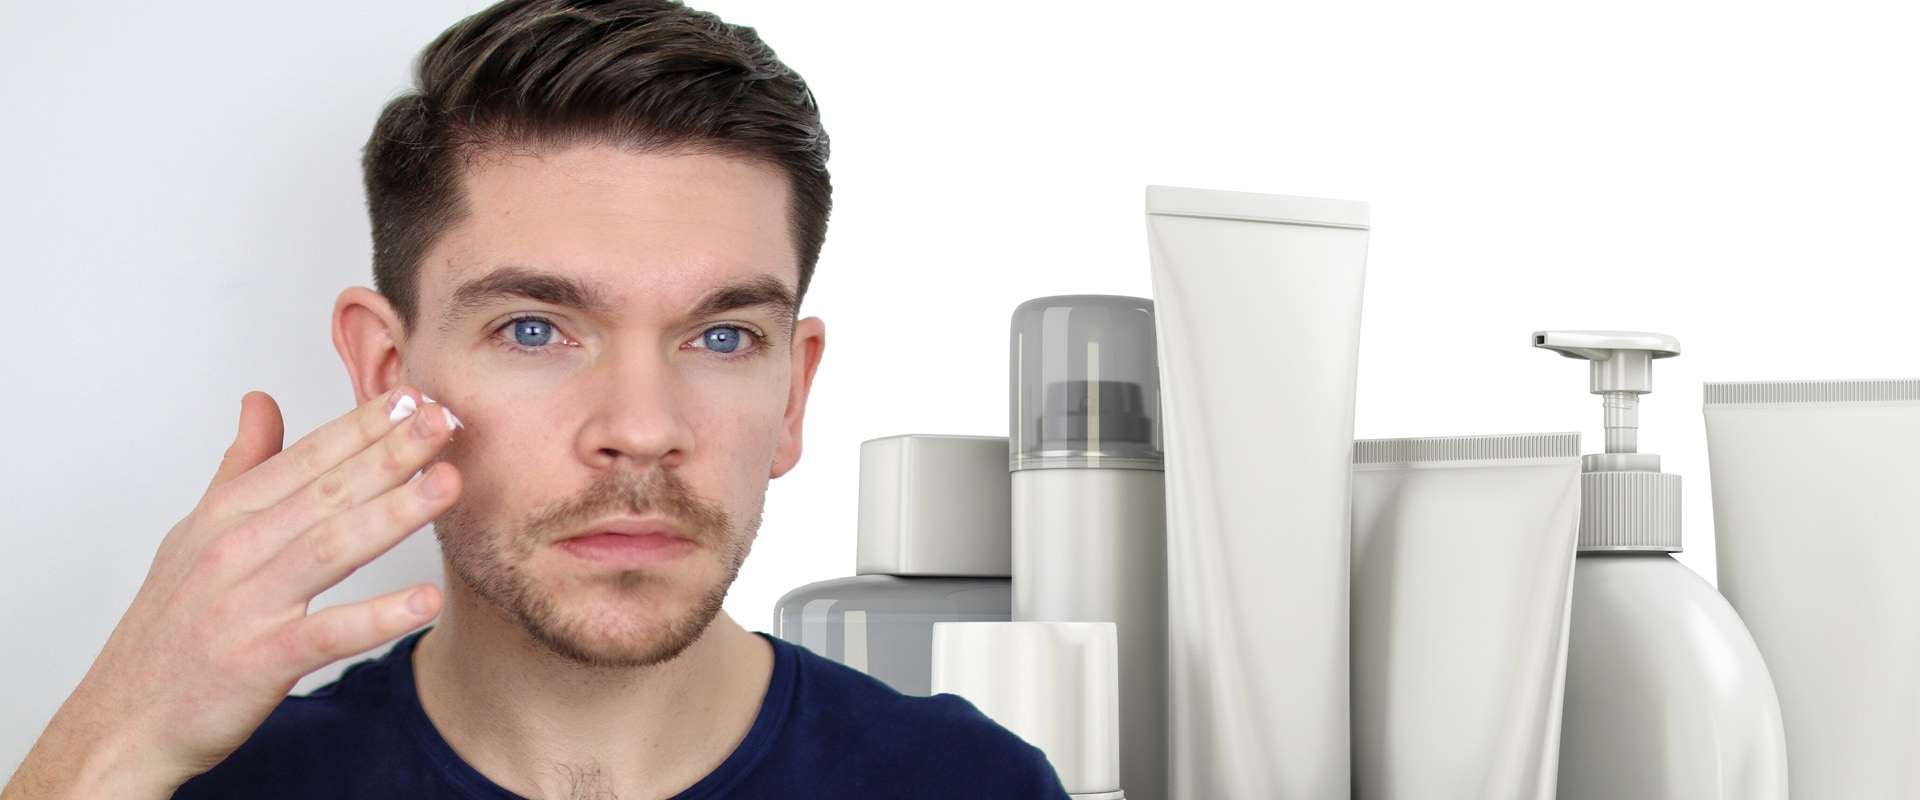 Are there any special skincare products for men with oily skin?